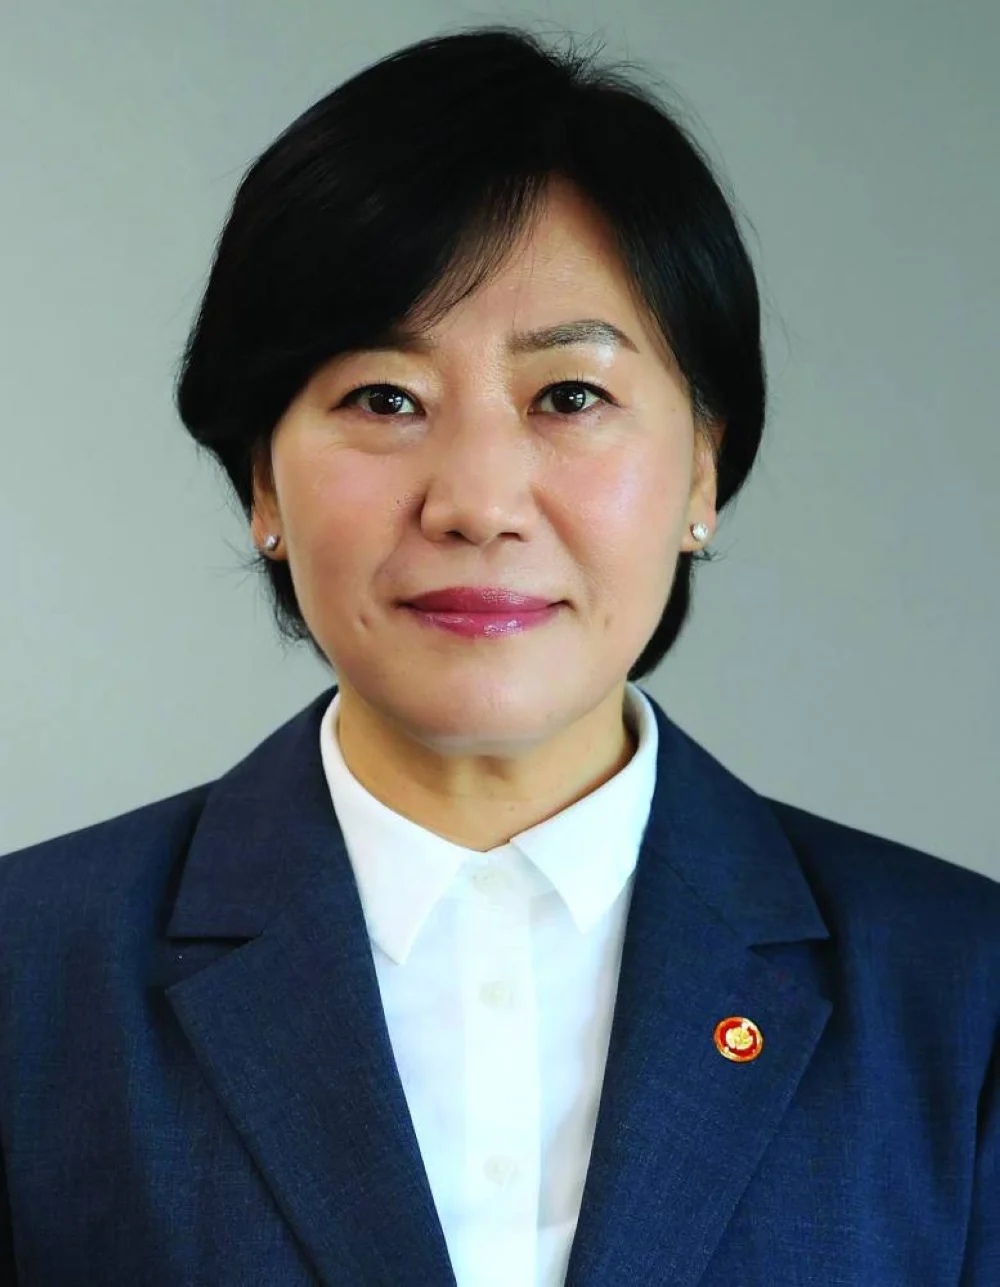 Song Miryung Minister of Agriculture, Food and Rural Affairs, Republic of Korea